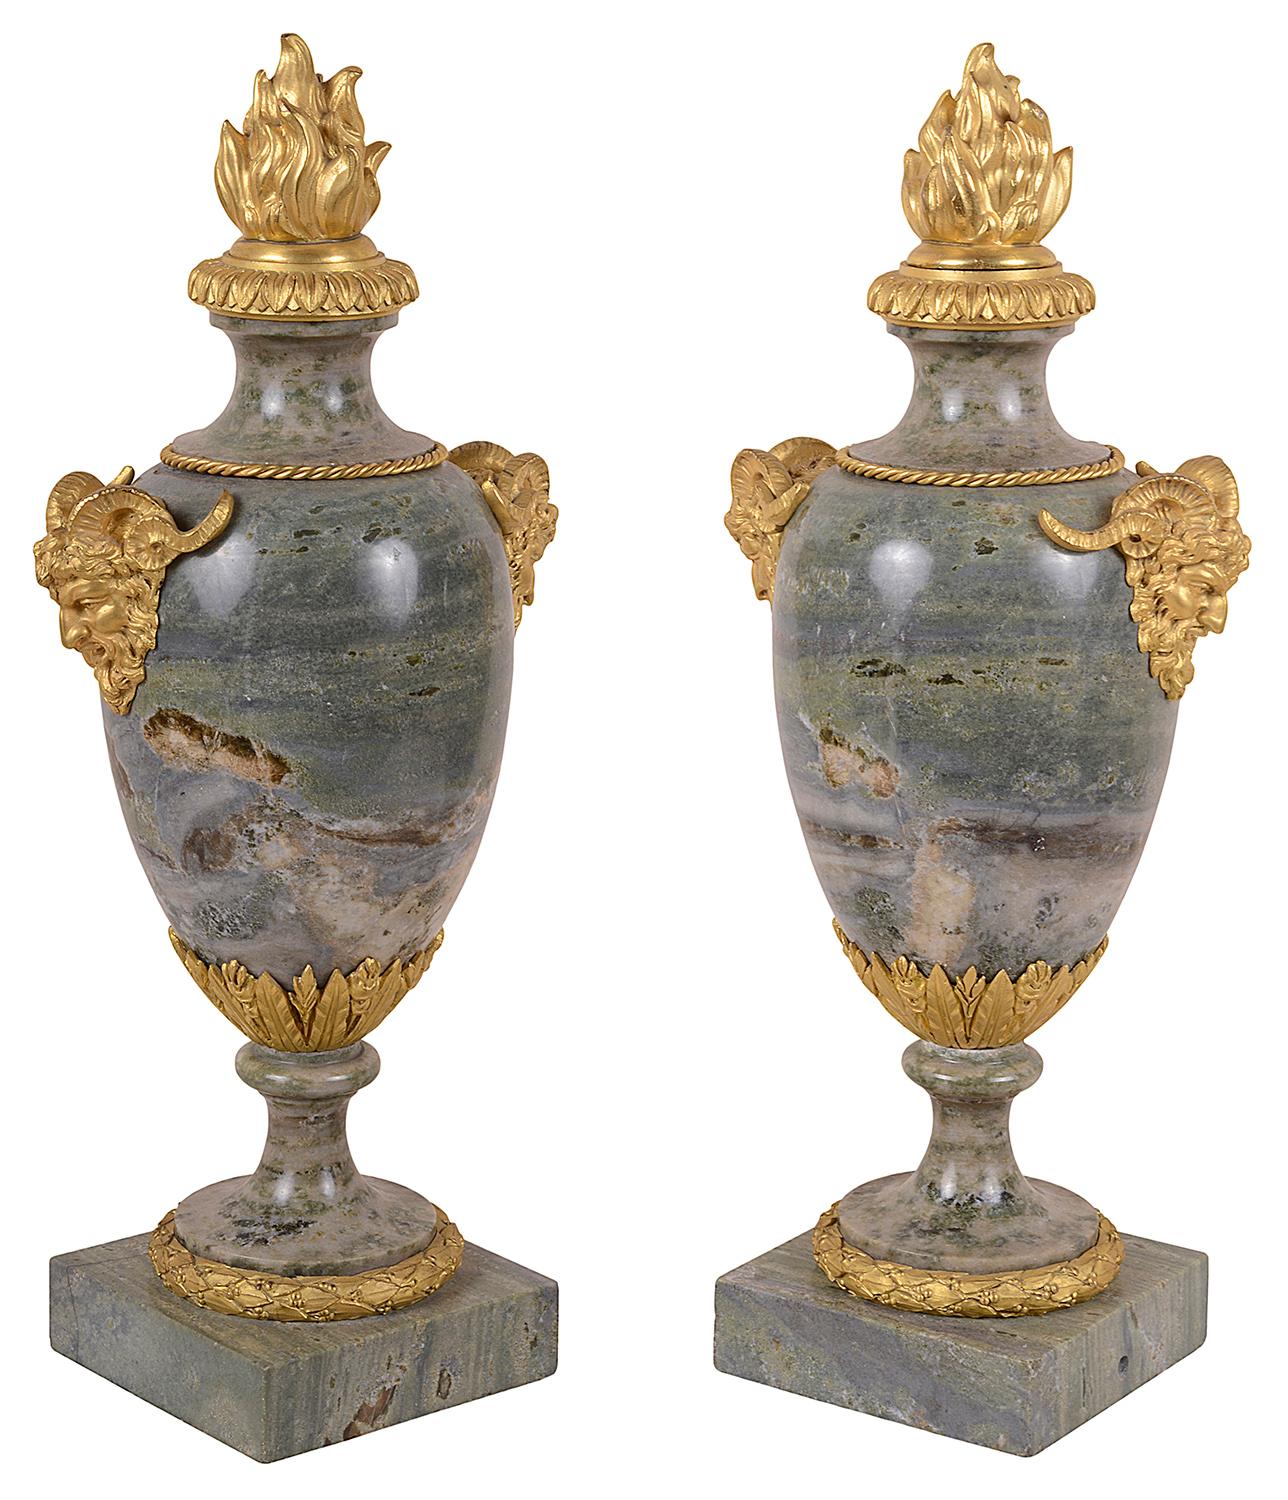 Renaissance Pair of 19th Century Marble and Ormolu Vases, Louis XVI Style For Sale